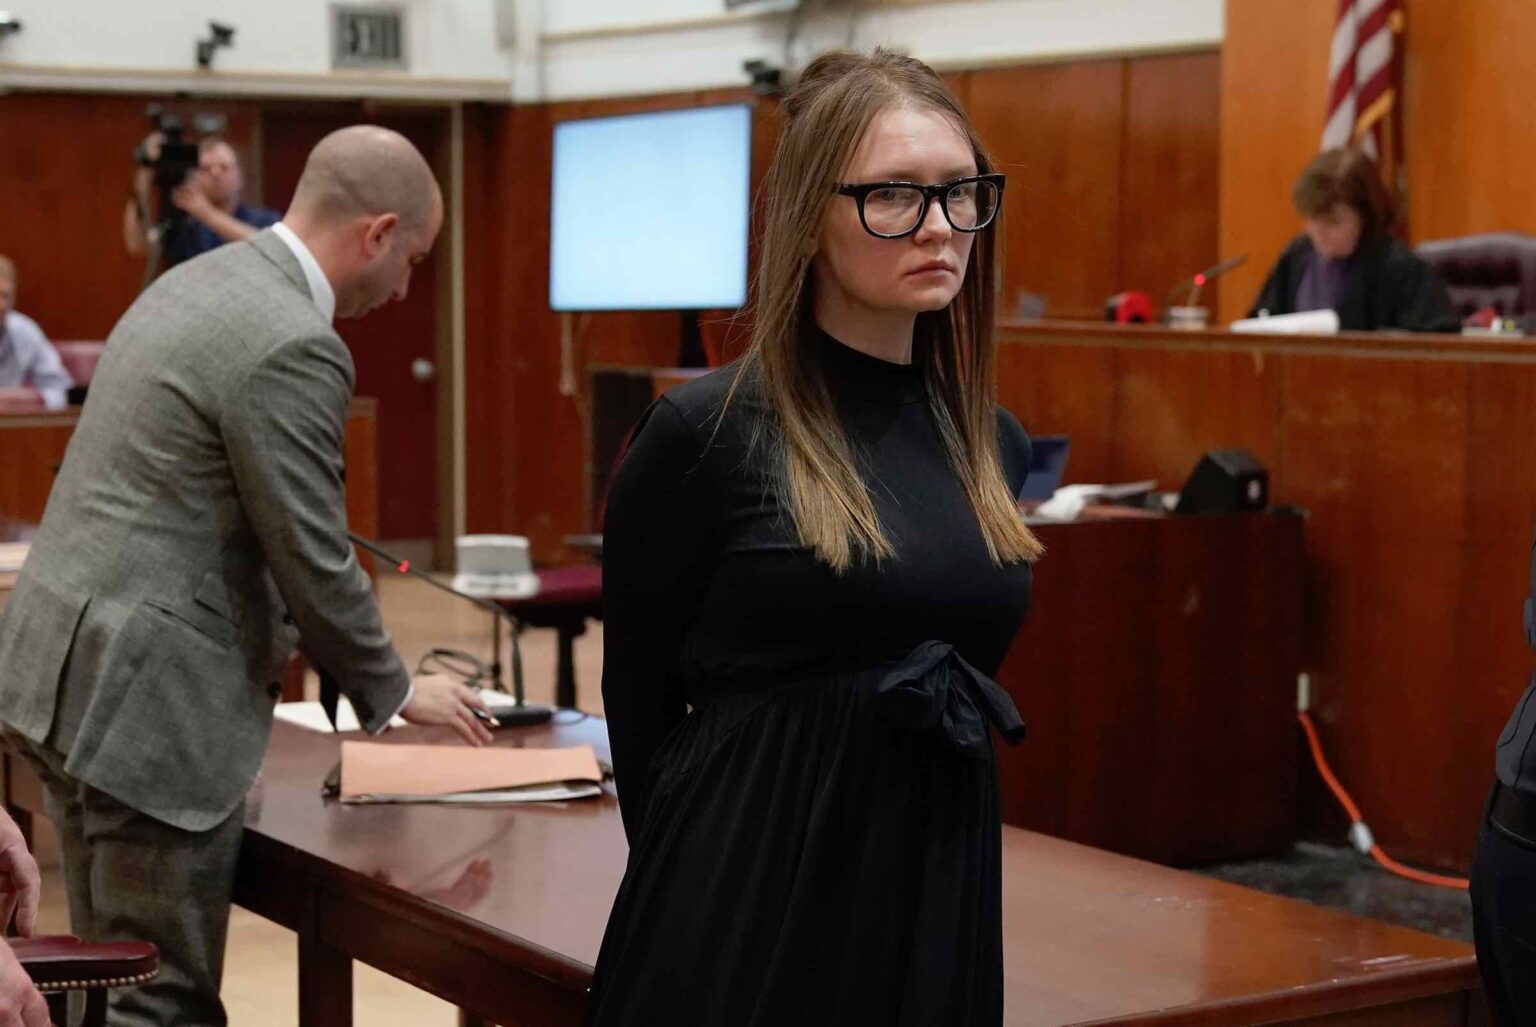 The new Netflix show 'Inventing Anna' is causing a lot of controversy. Is Anna Delvey real? Here's everything you need to know.